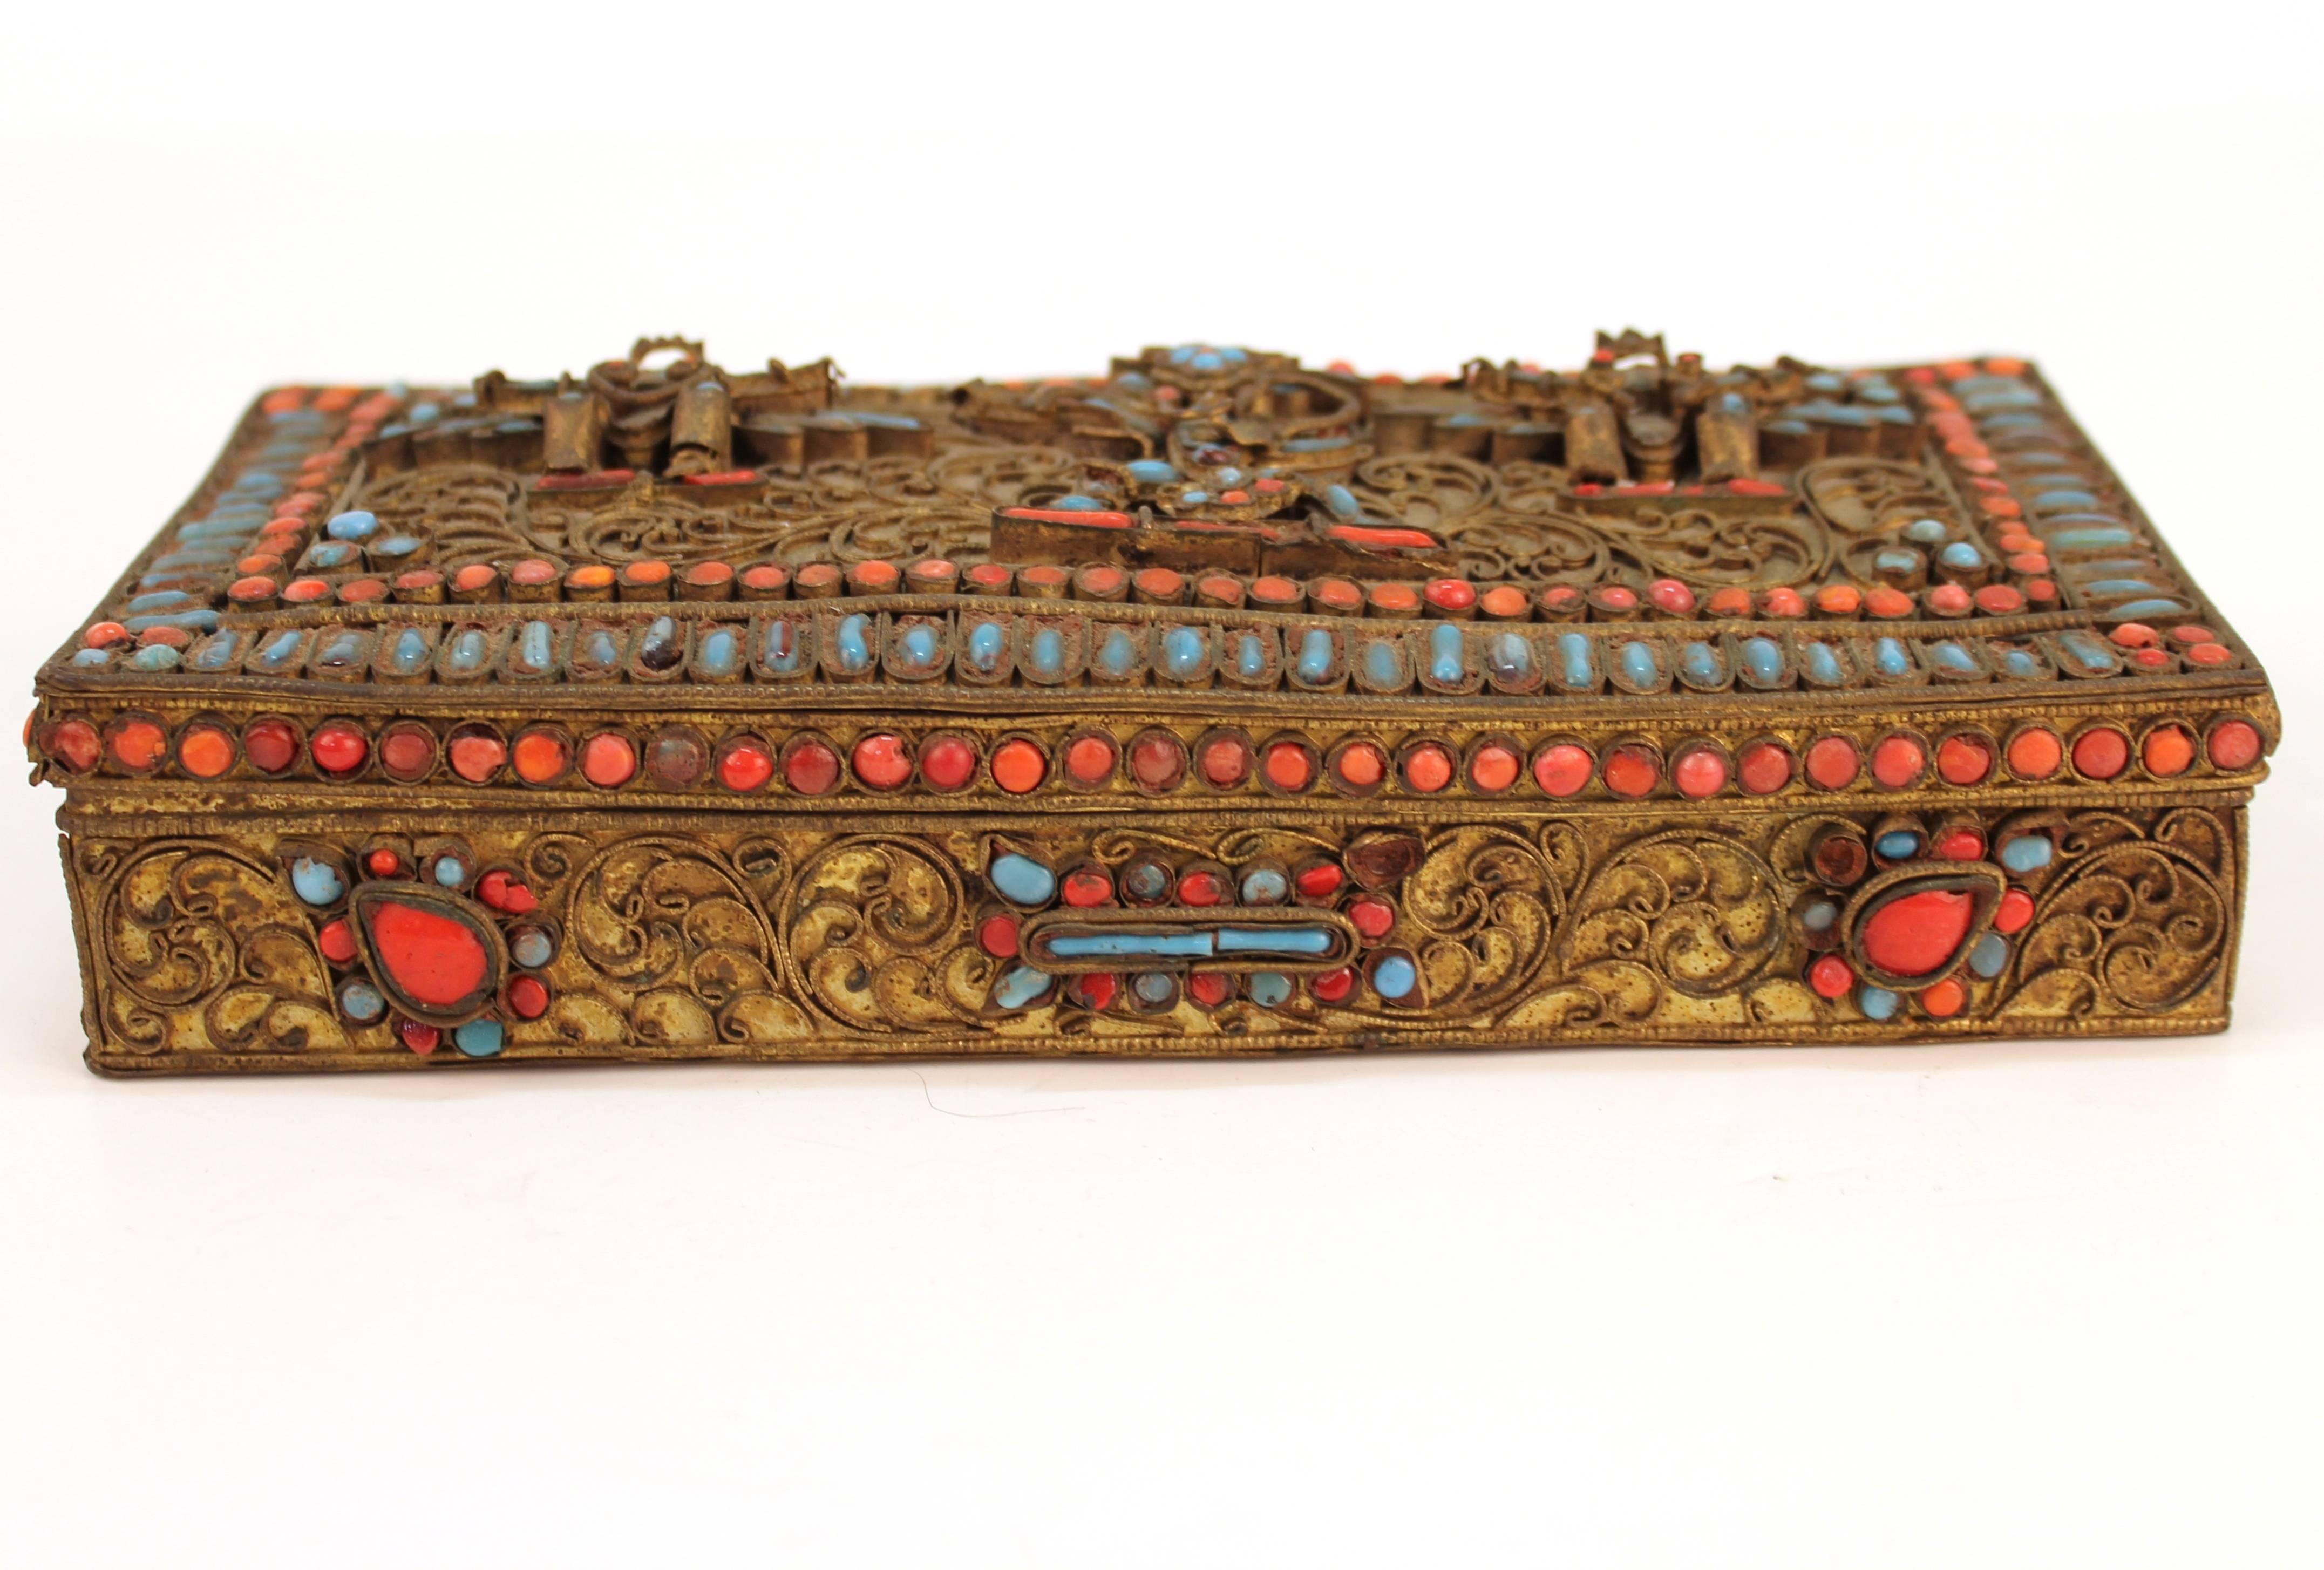 A Chinese-Tibetan brass box with turquoise and coral inlay and filigree figures of Vishnu and Garuda birds on the cover lid. In good vintage condition with age appropriate wear and patina, with some missing inlay pieces.